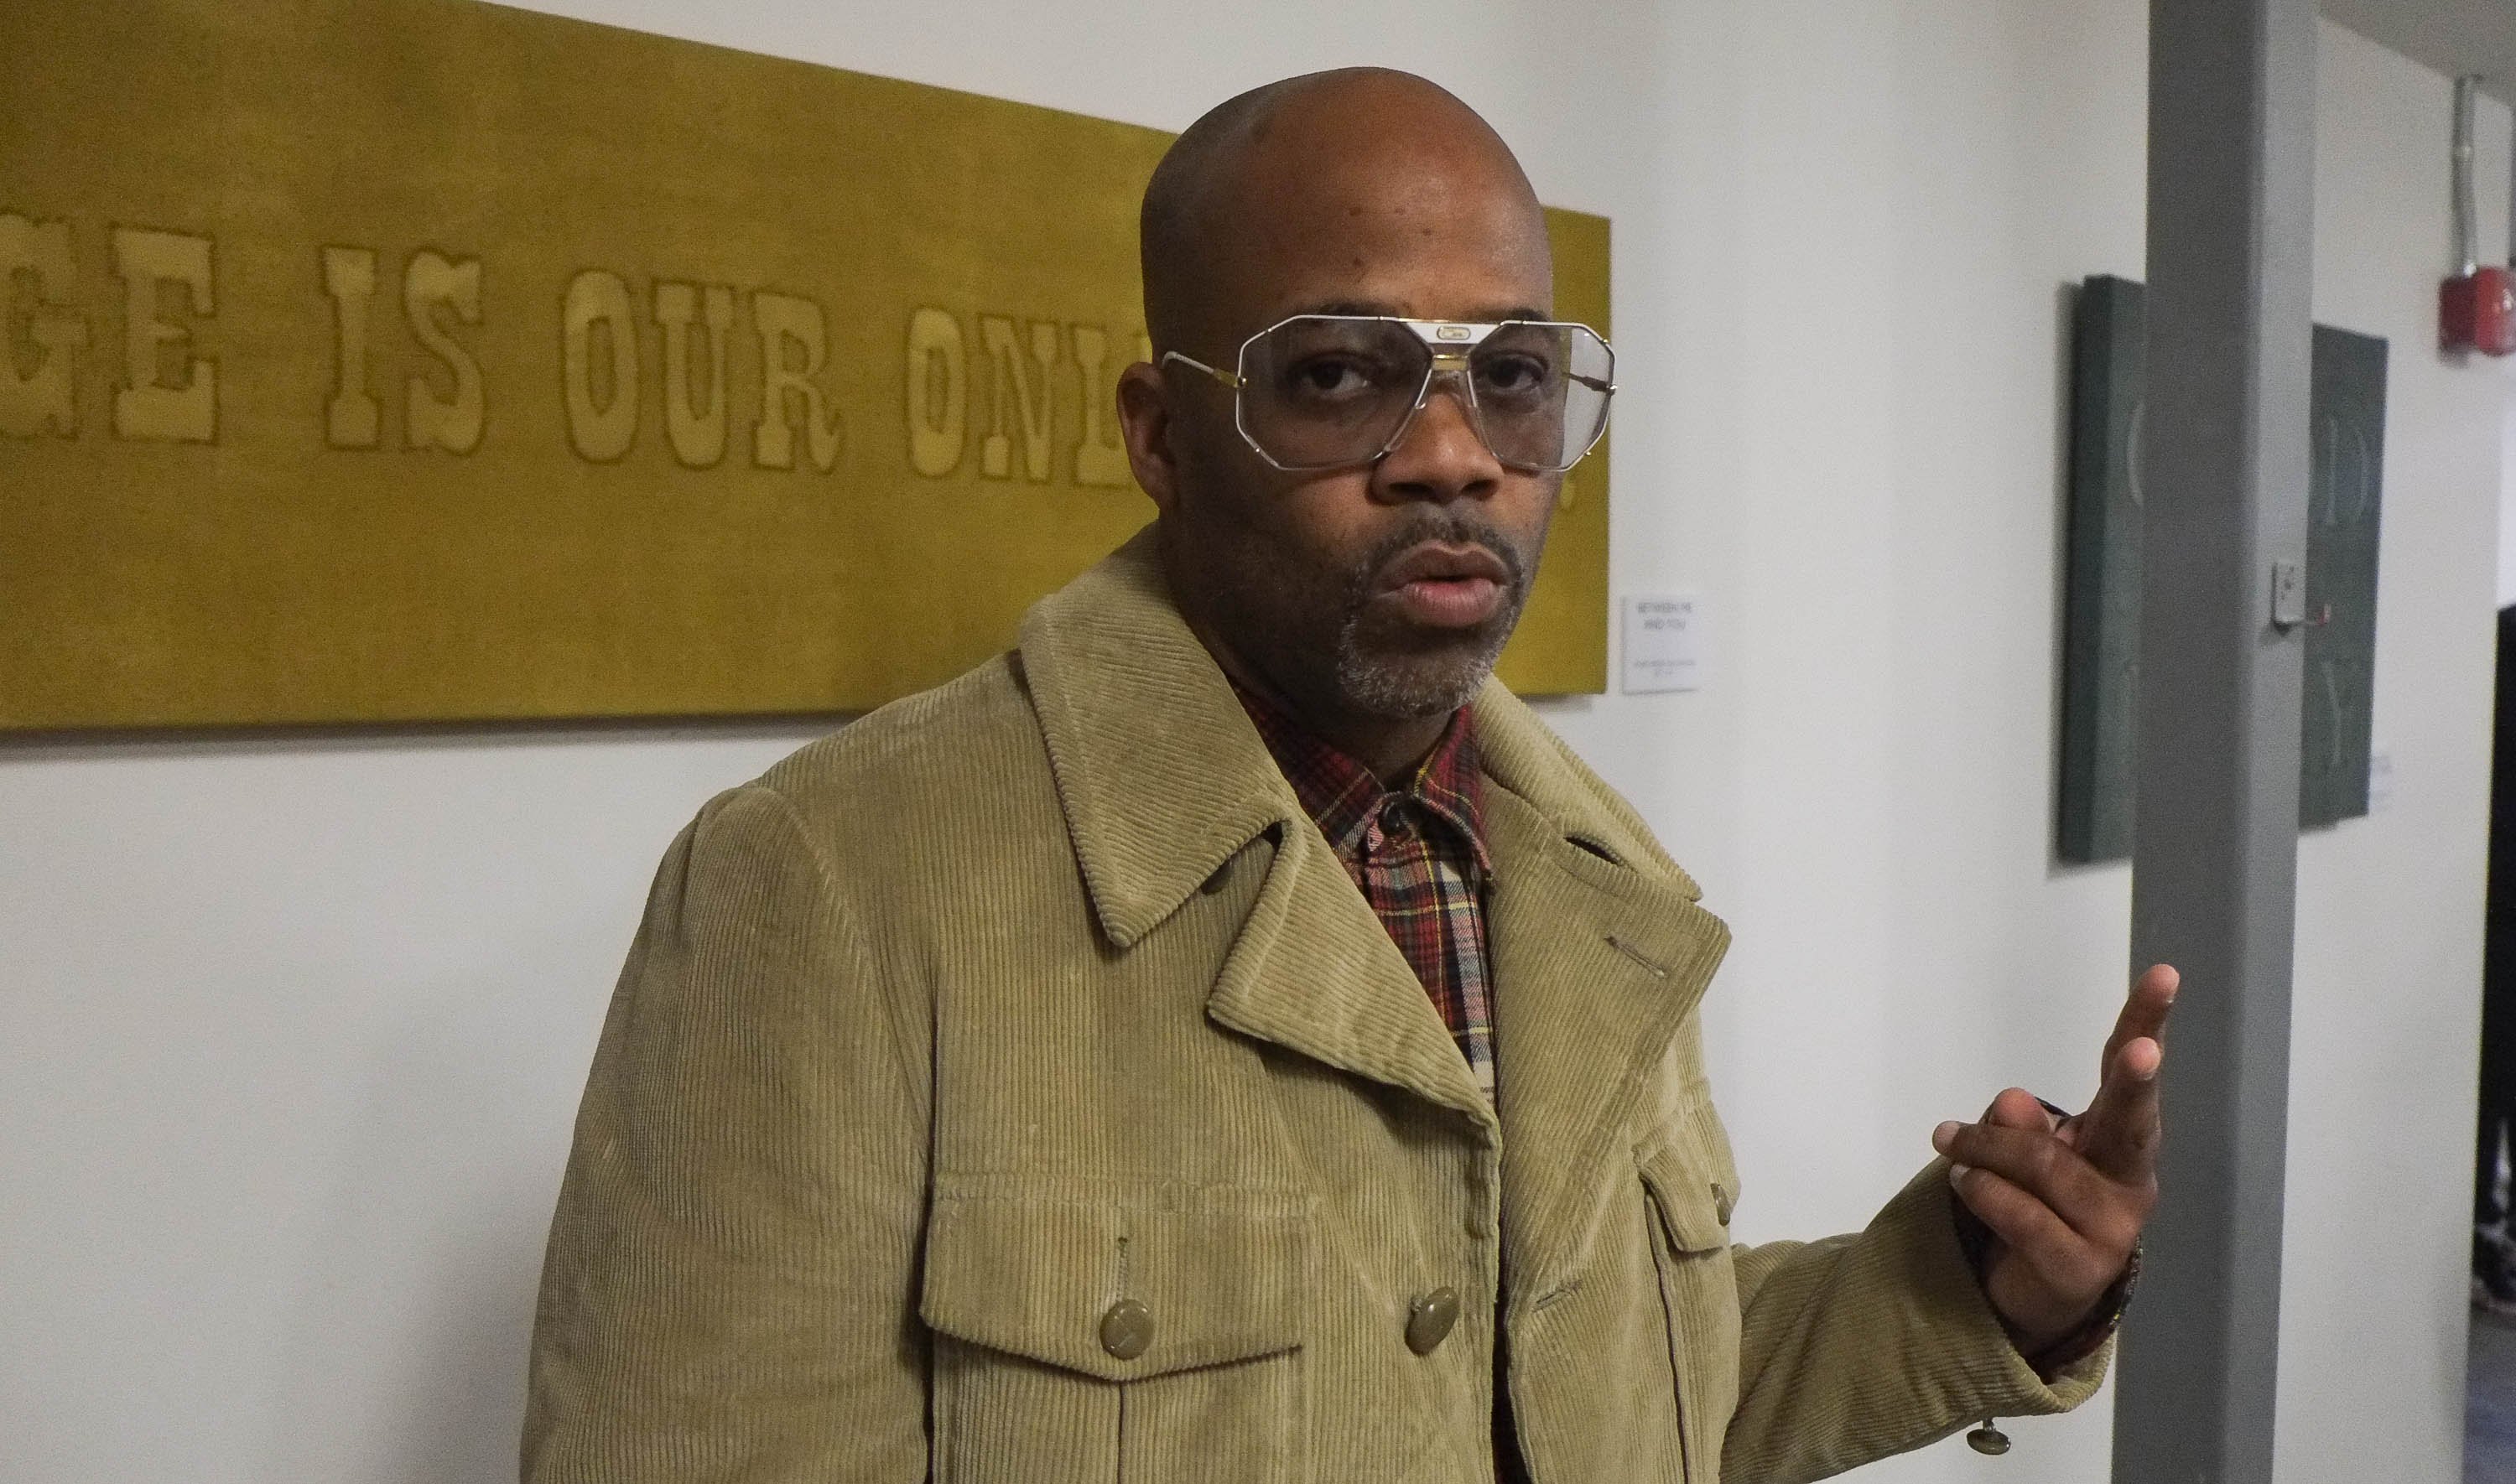 Damon Dash attending an art exhibition opening in March 2014. | Photo: Getty Images